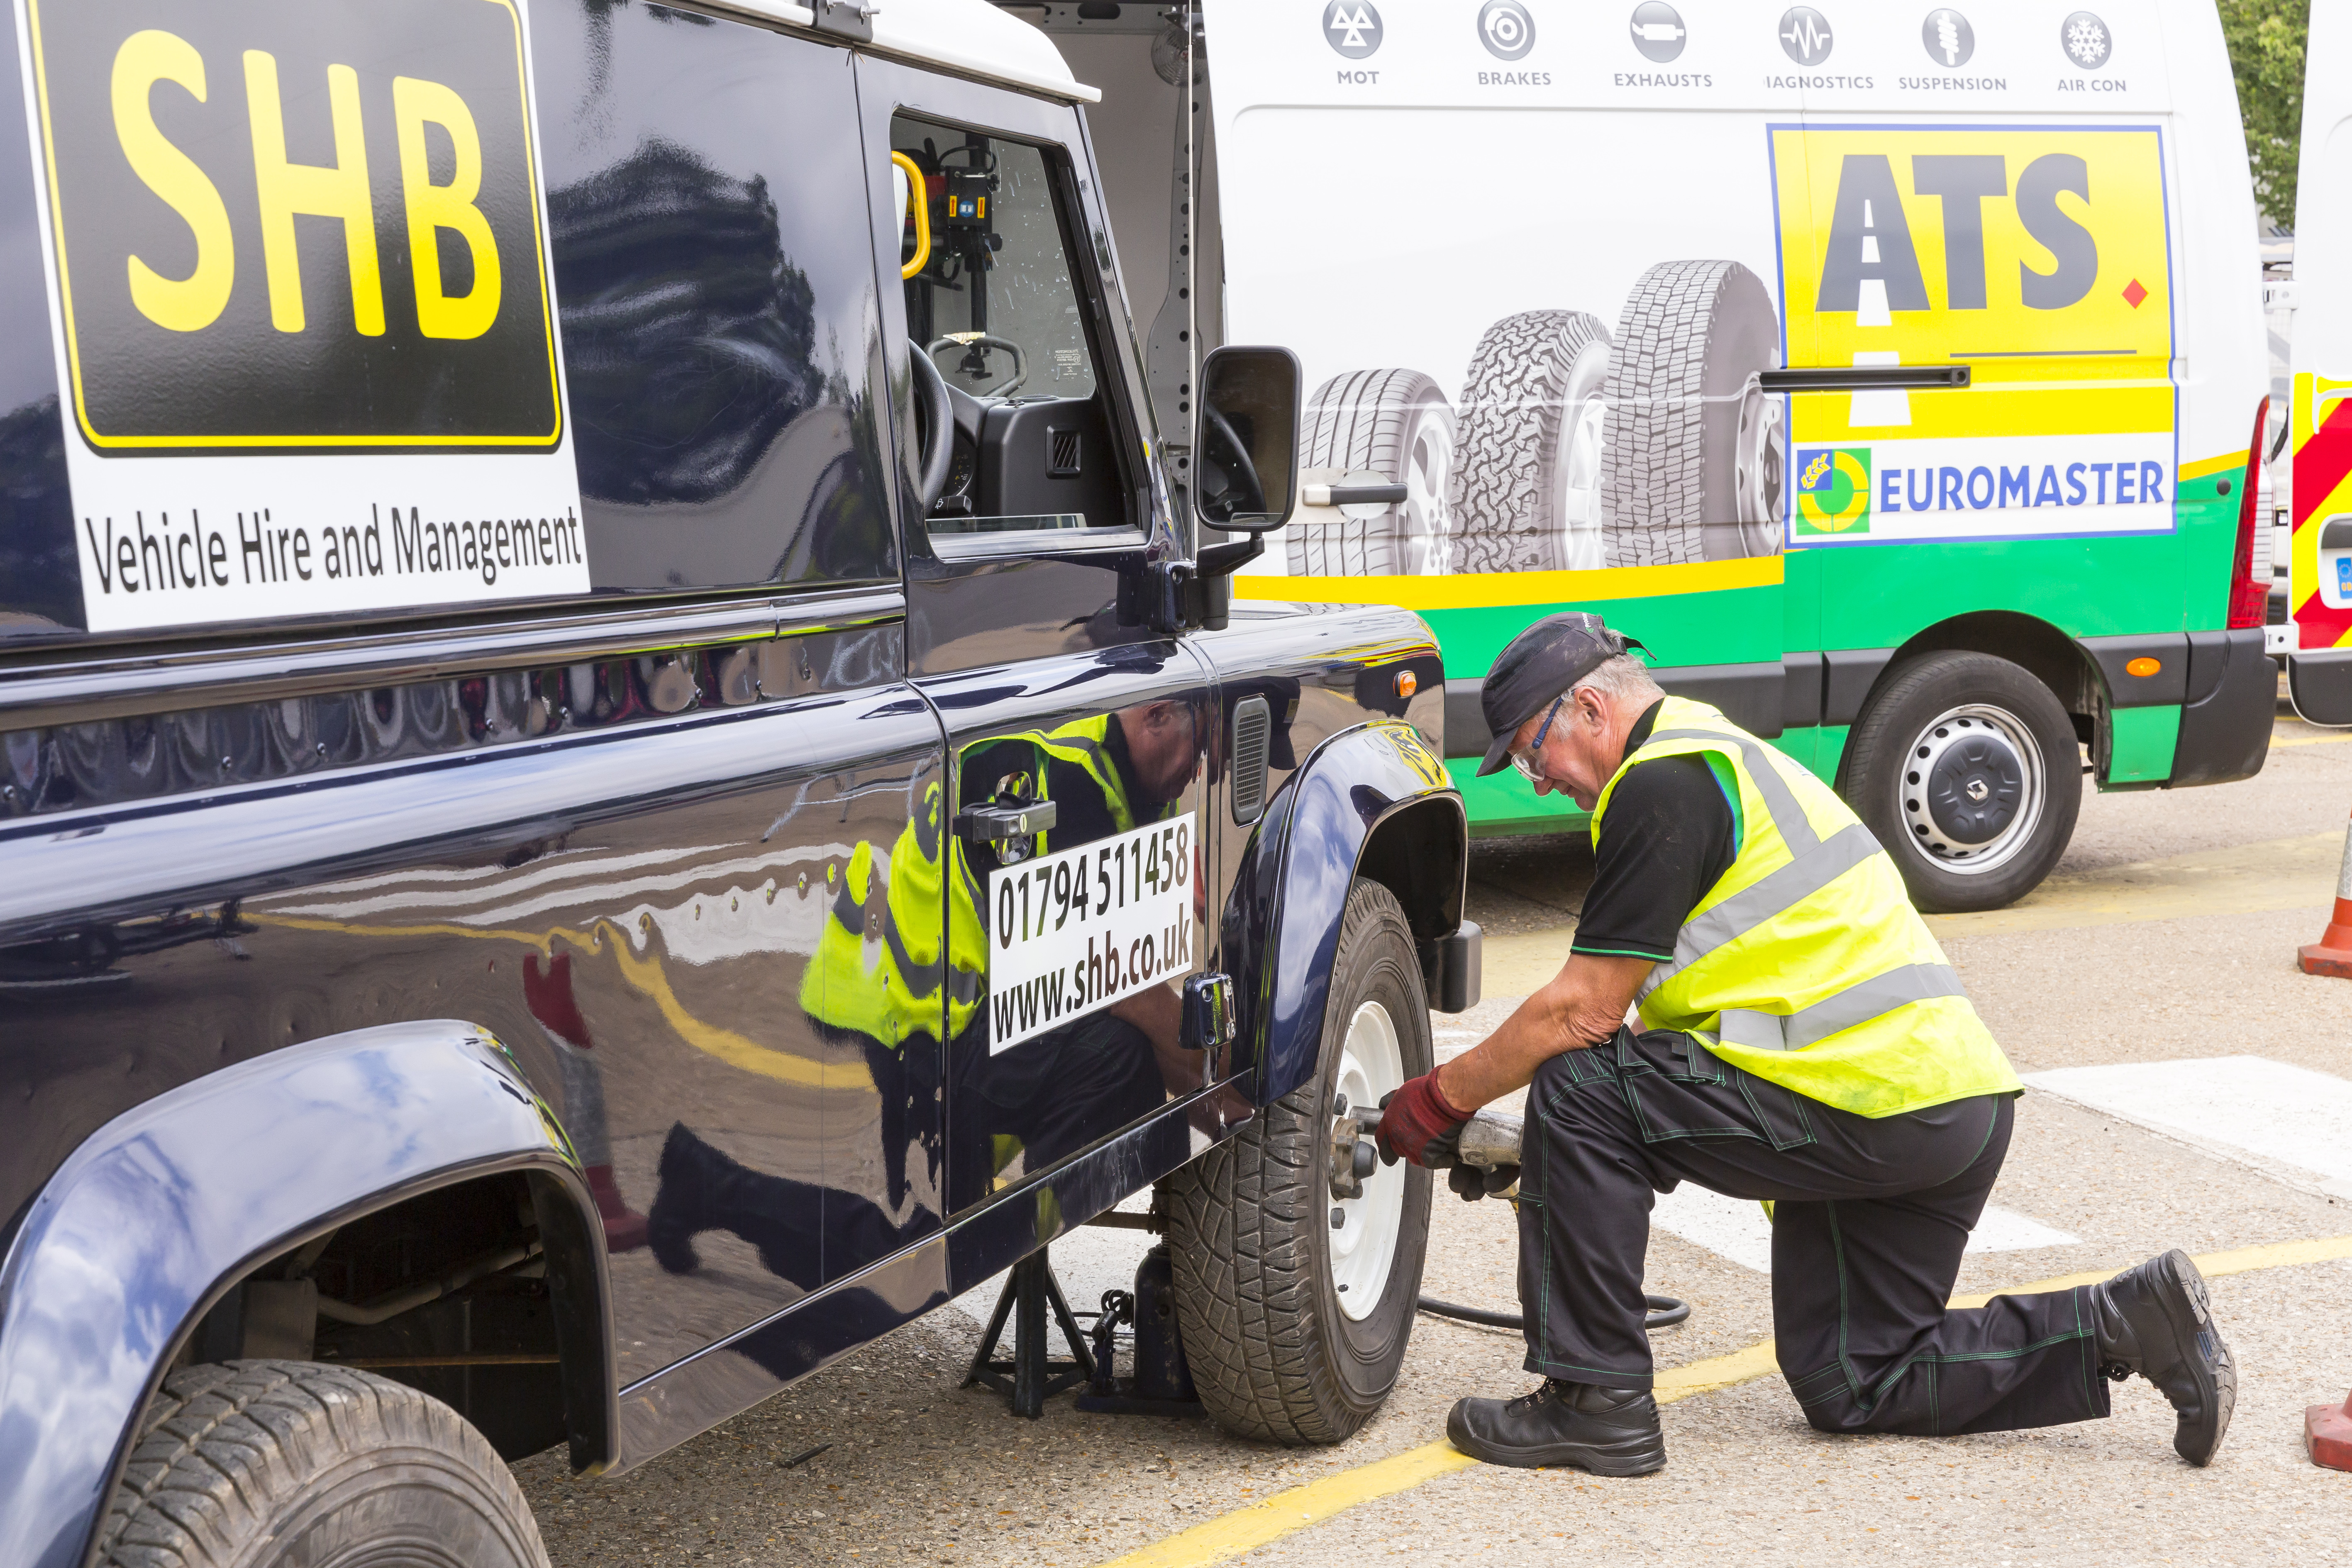 SHB Hire selects ATS Euromaster as tyre partner